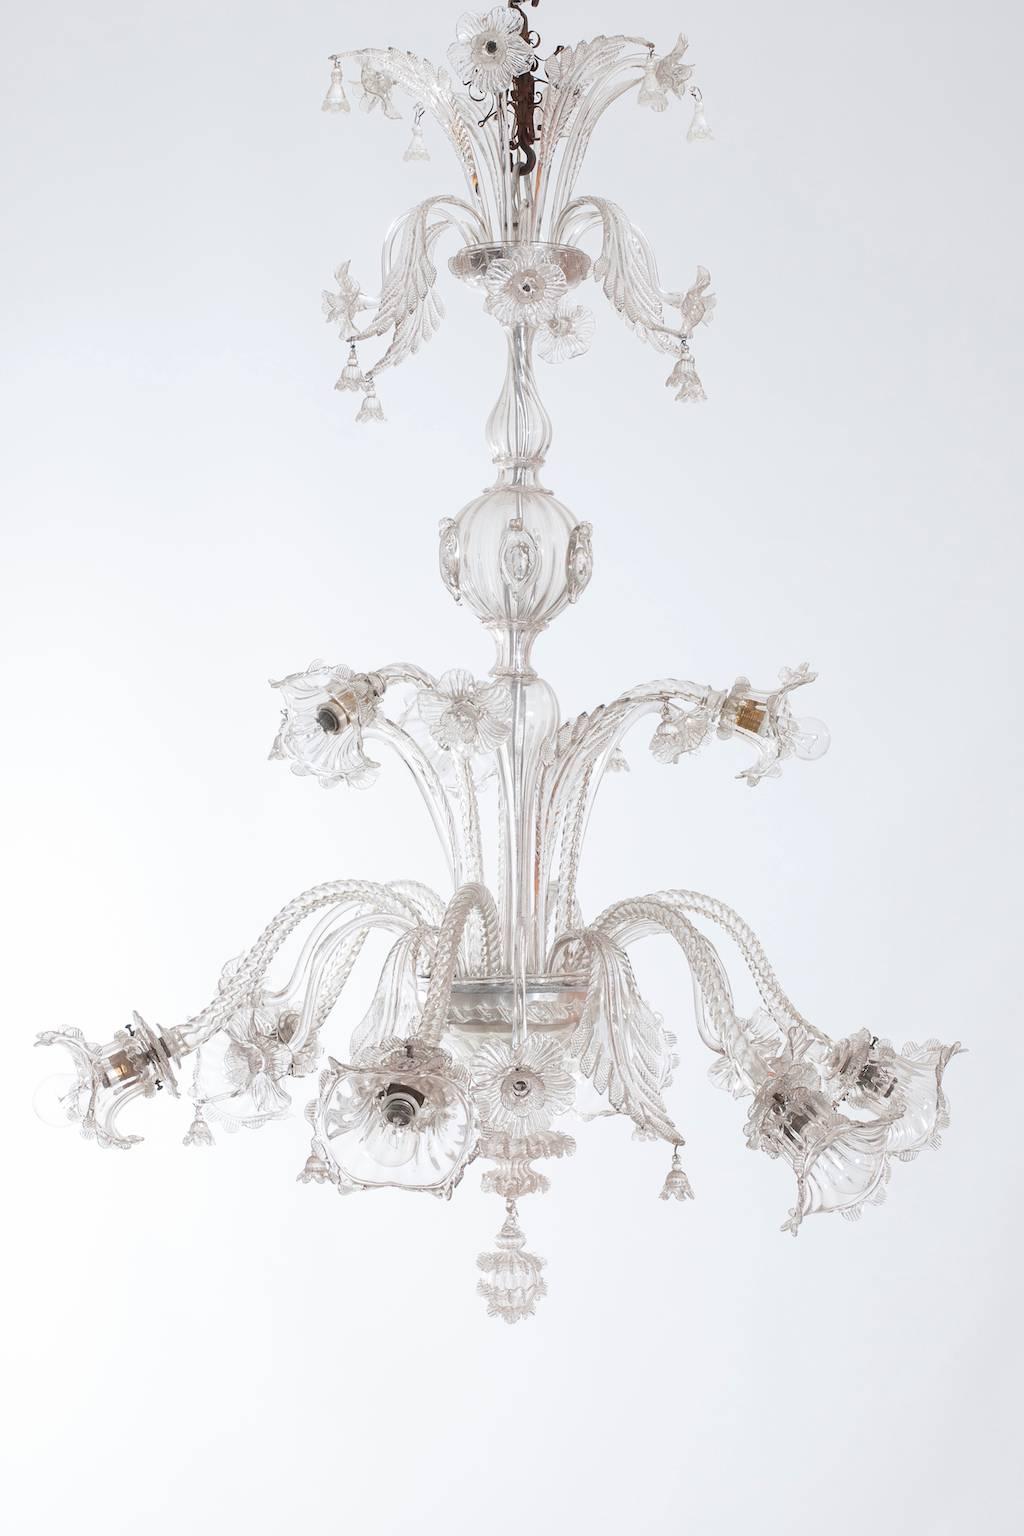 Elegant Italian Venetian chandelier in Murano glass in the style of Galliano Ferro, circa 1920s, having elegant six arms look down and three arms look up, with beautiful leafs and flowers look up and down, in the middle part is composed of two stems